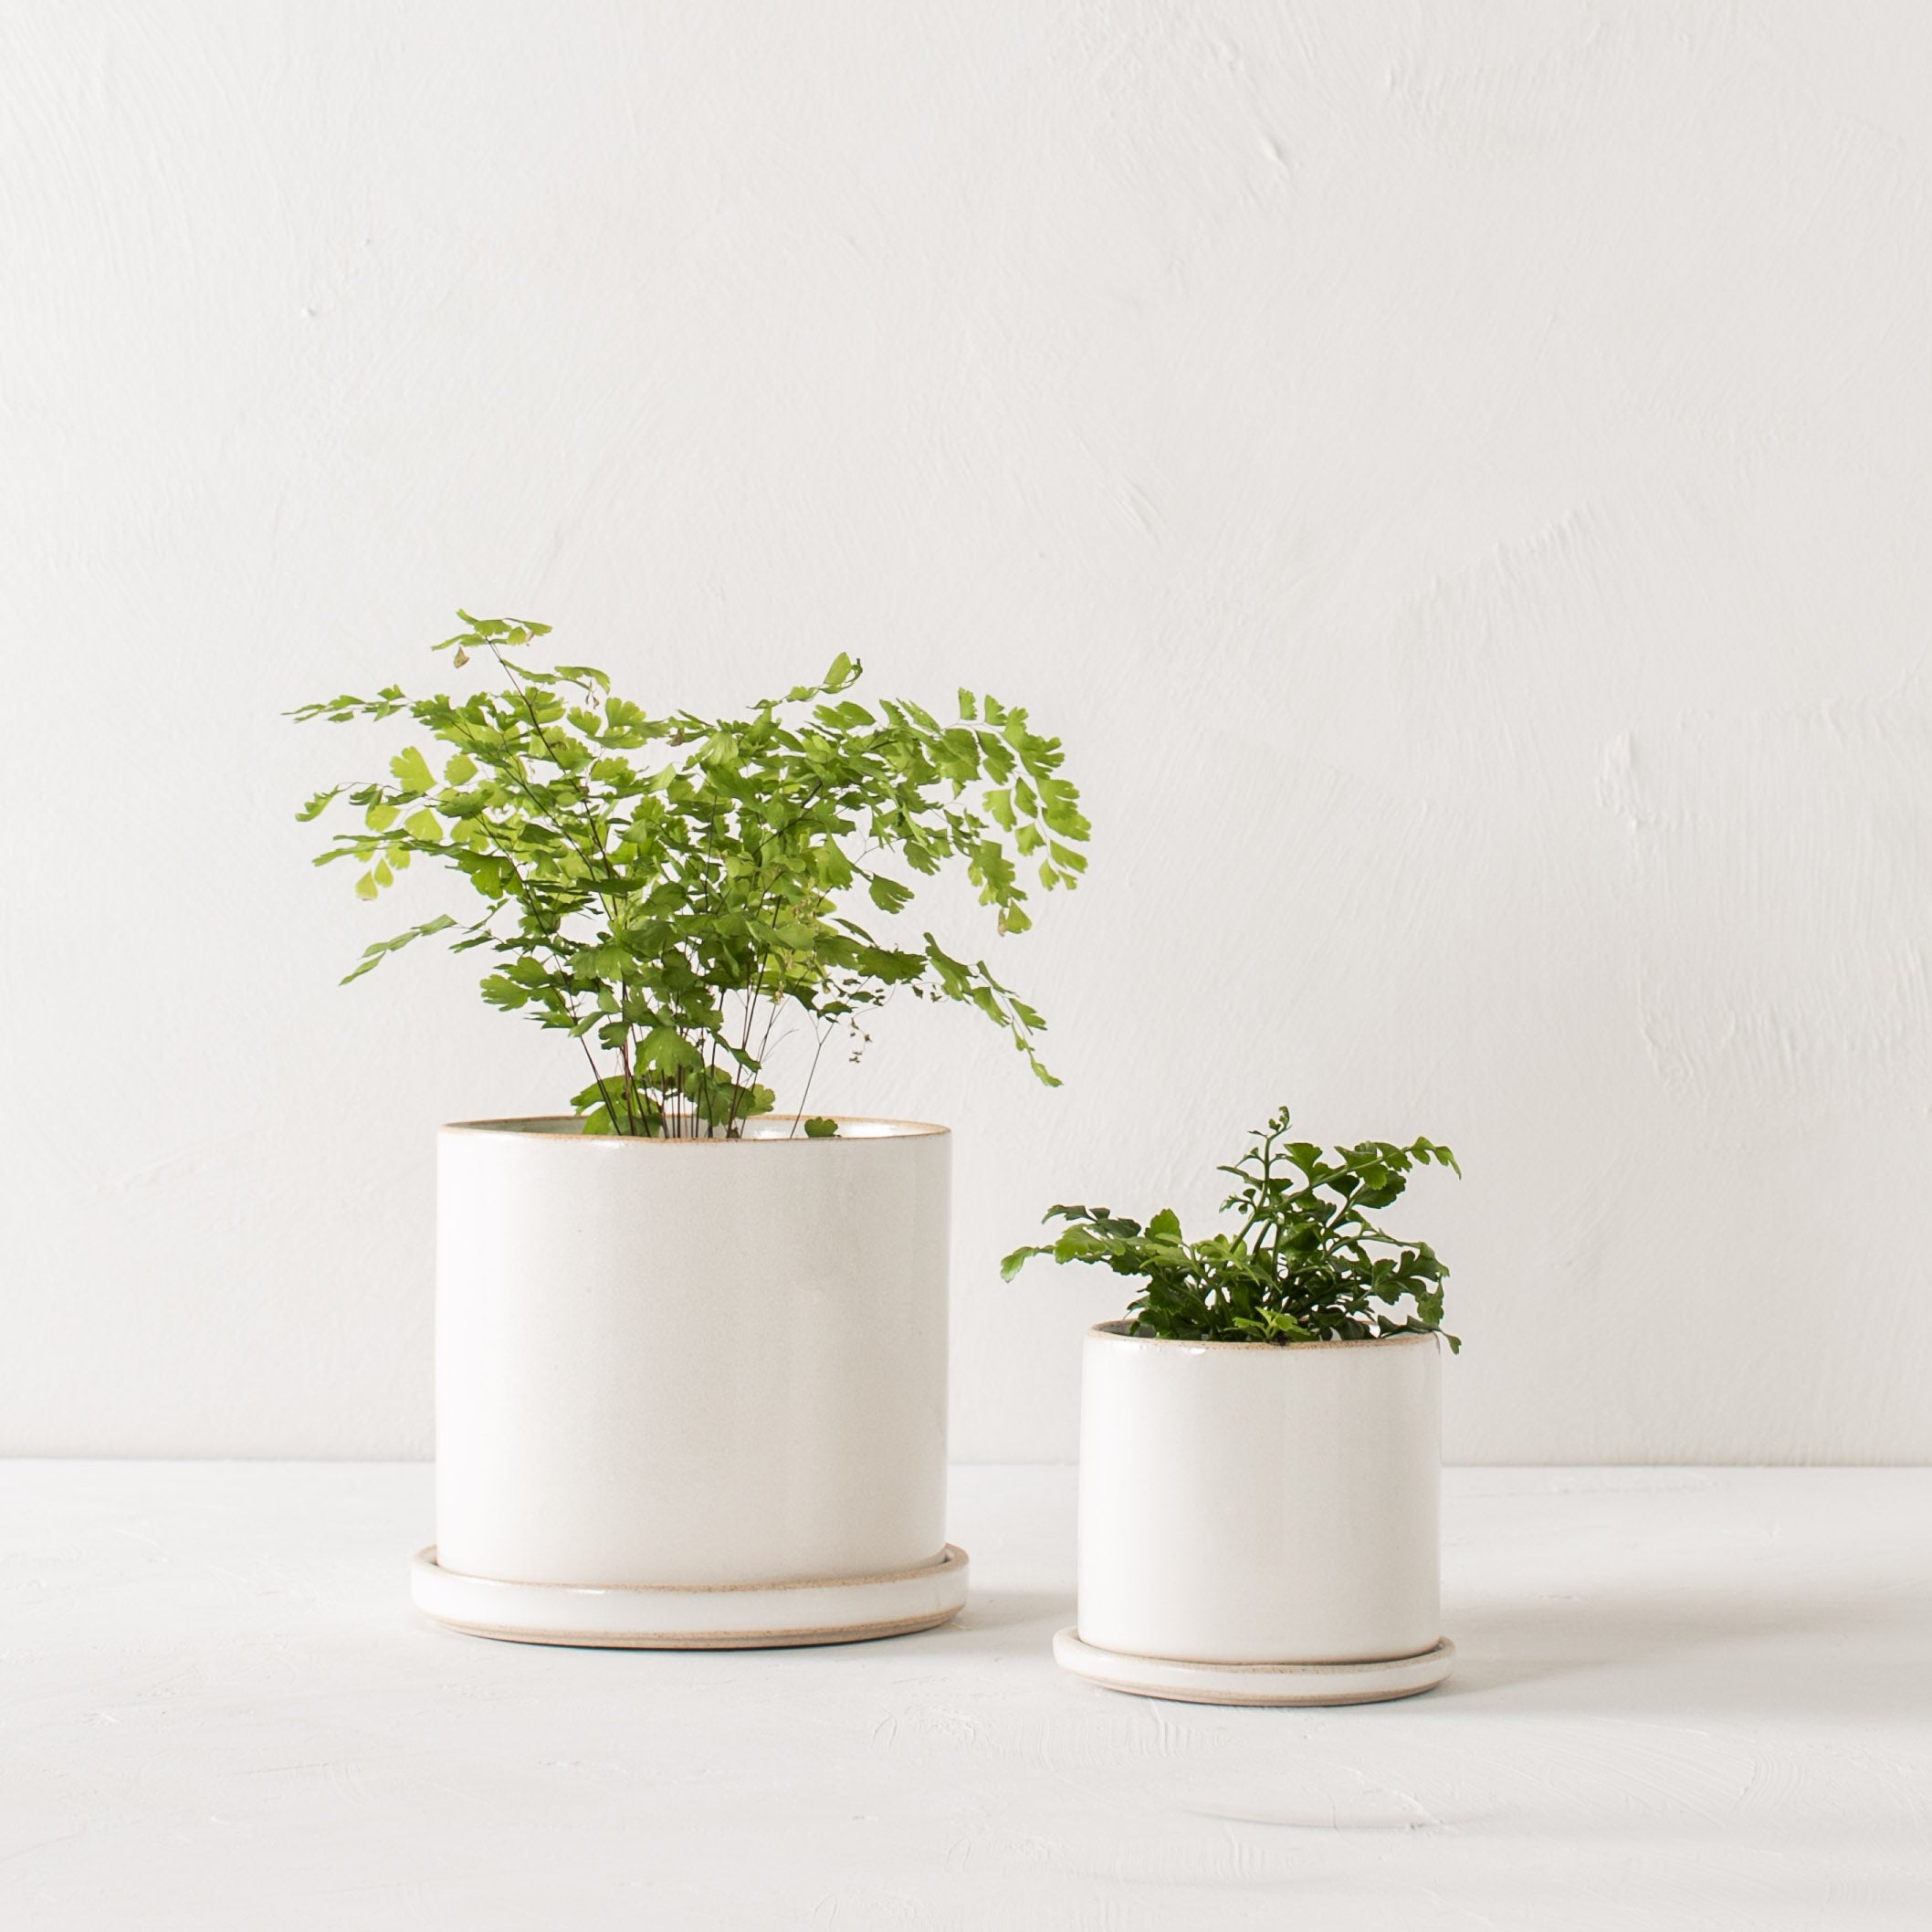 Two minimal white ceramic planters, they have exposed stoneware rims and bases. Both planters have plants inside as well as bottom drainage dishes. Handmade ceramic planters designed and sold by Convivial Production, Kansas City ceramics. 